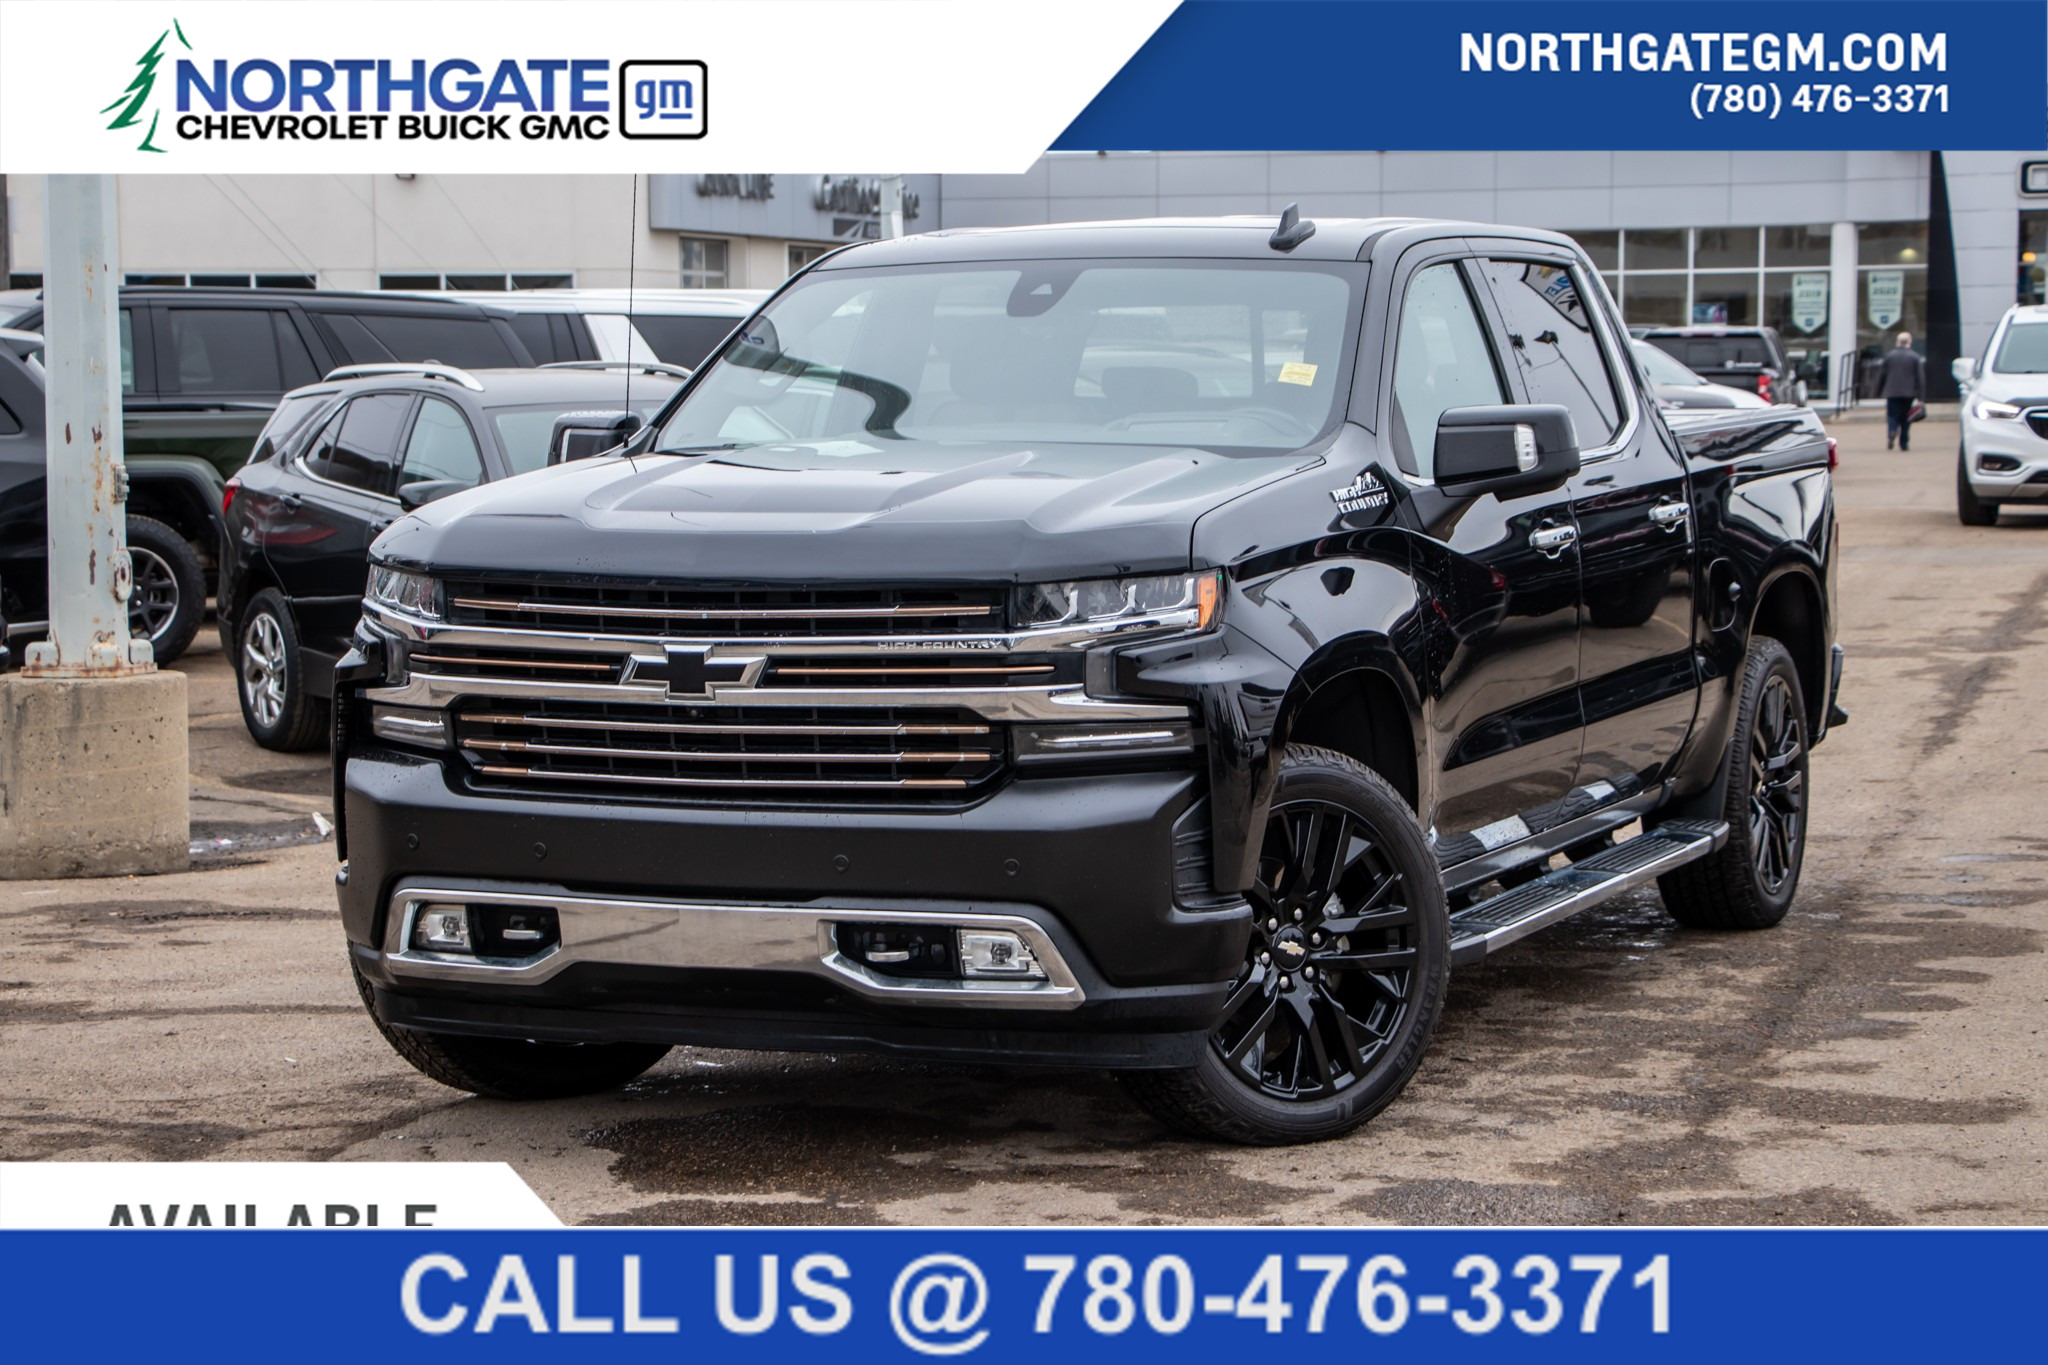 2020 Chevrolet Silverado 1500 High Country HIGH COUNTRY | 5.3L | TRAILERING, SAF